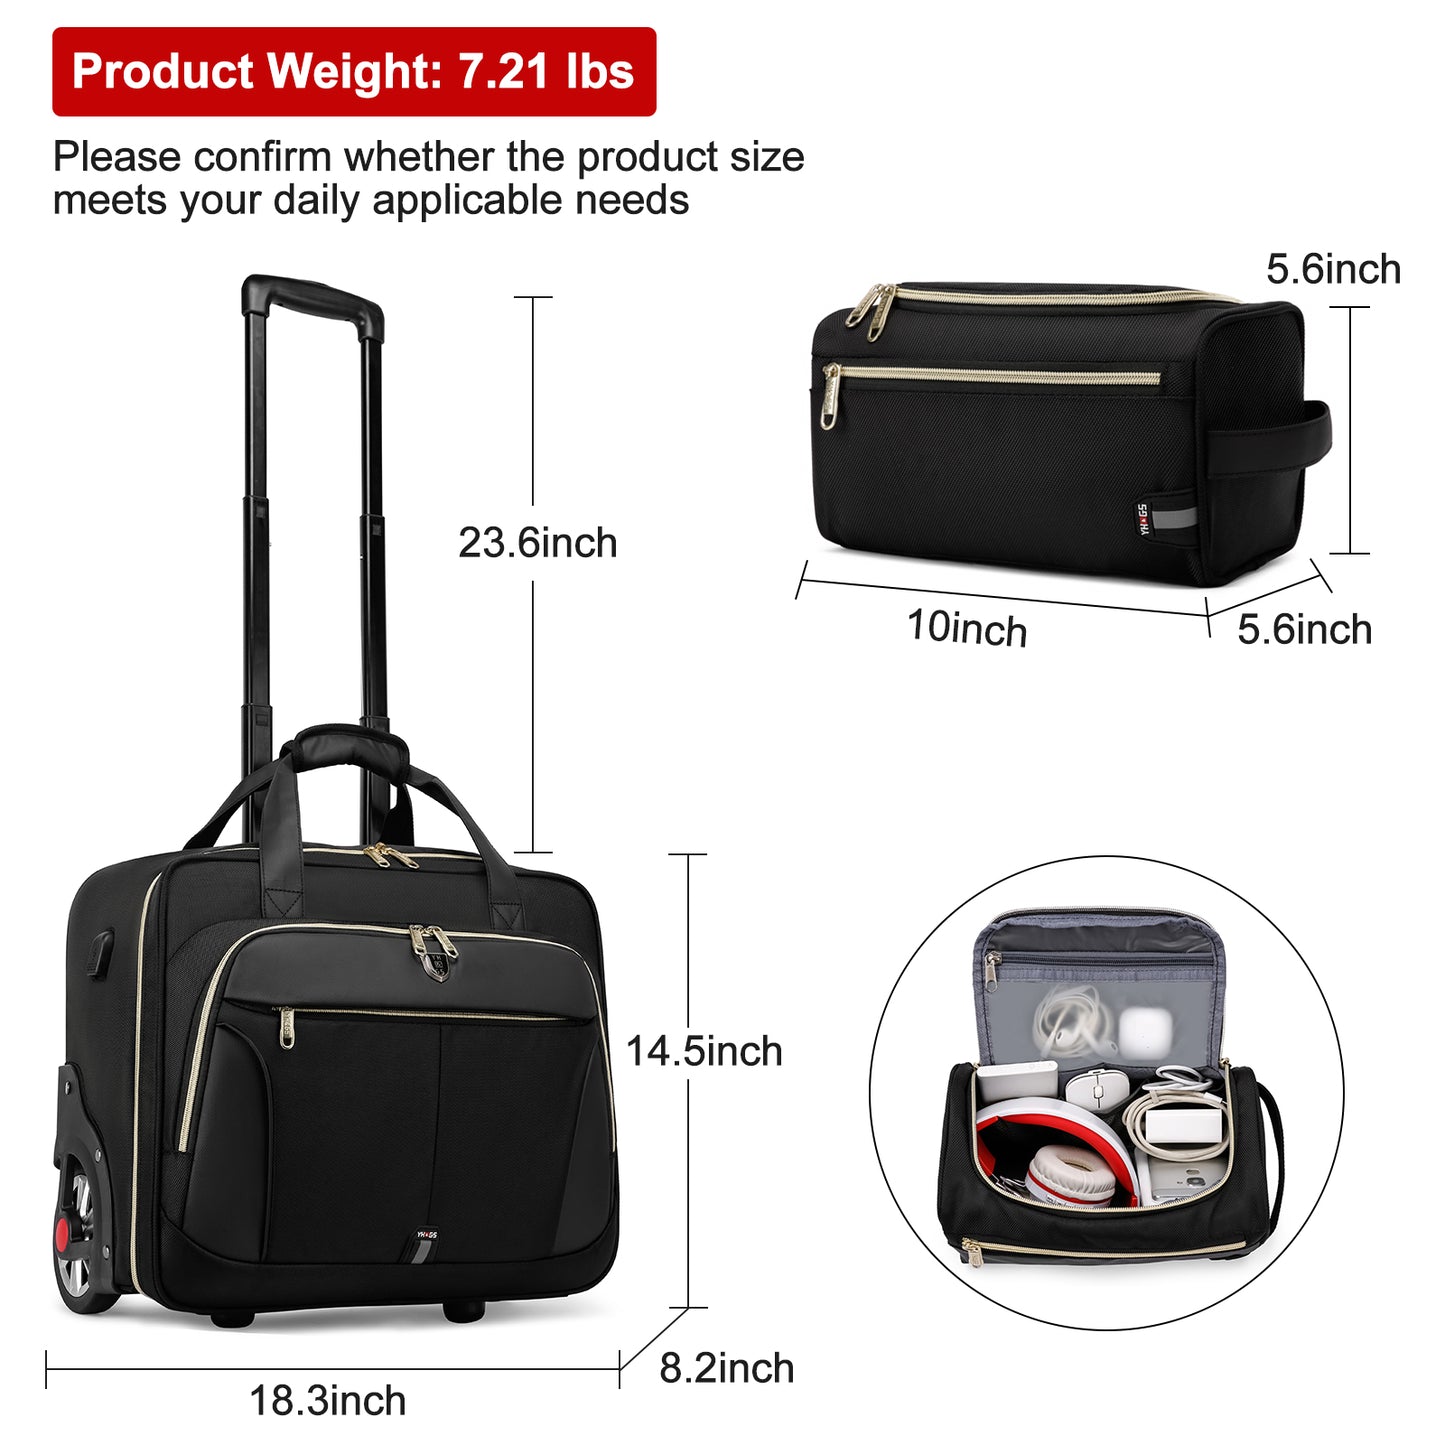 Rolling Laptop Bag, 17.3 inch Rolling Briefcase for Men Women, Laptop Briefcase on Wheels, Overnight Bags with Carry On Bag, Water-Proof Travel Bag with USB Port for Business Travel 2pcs Set, Black